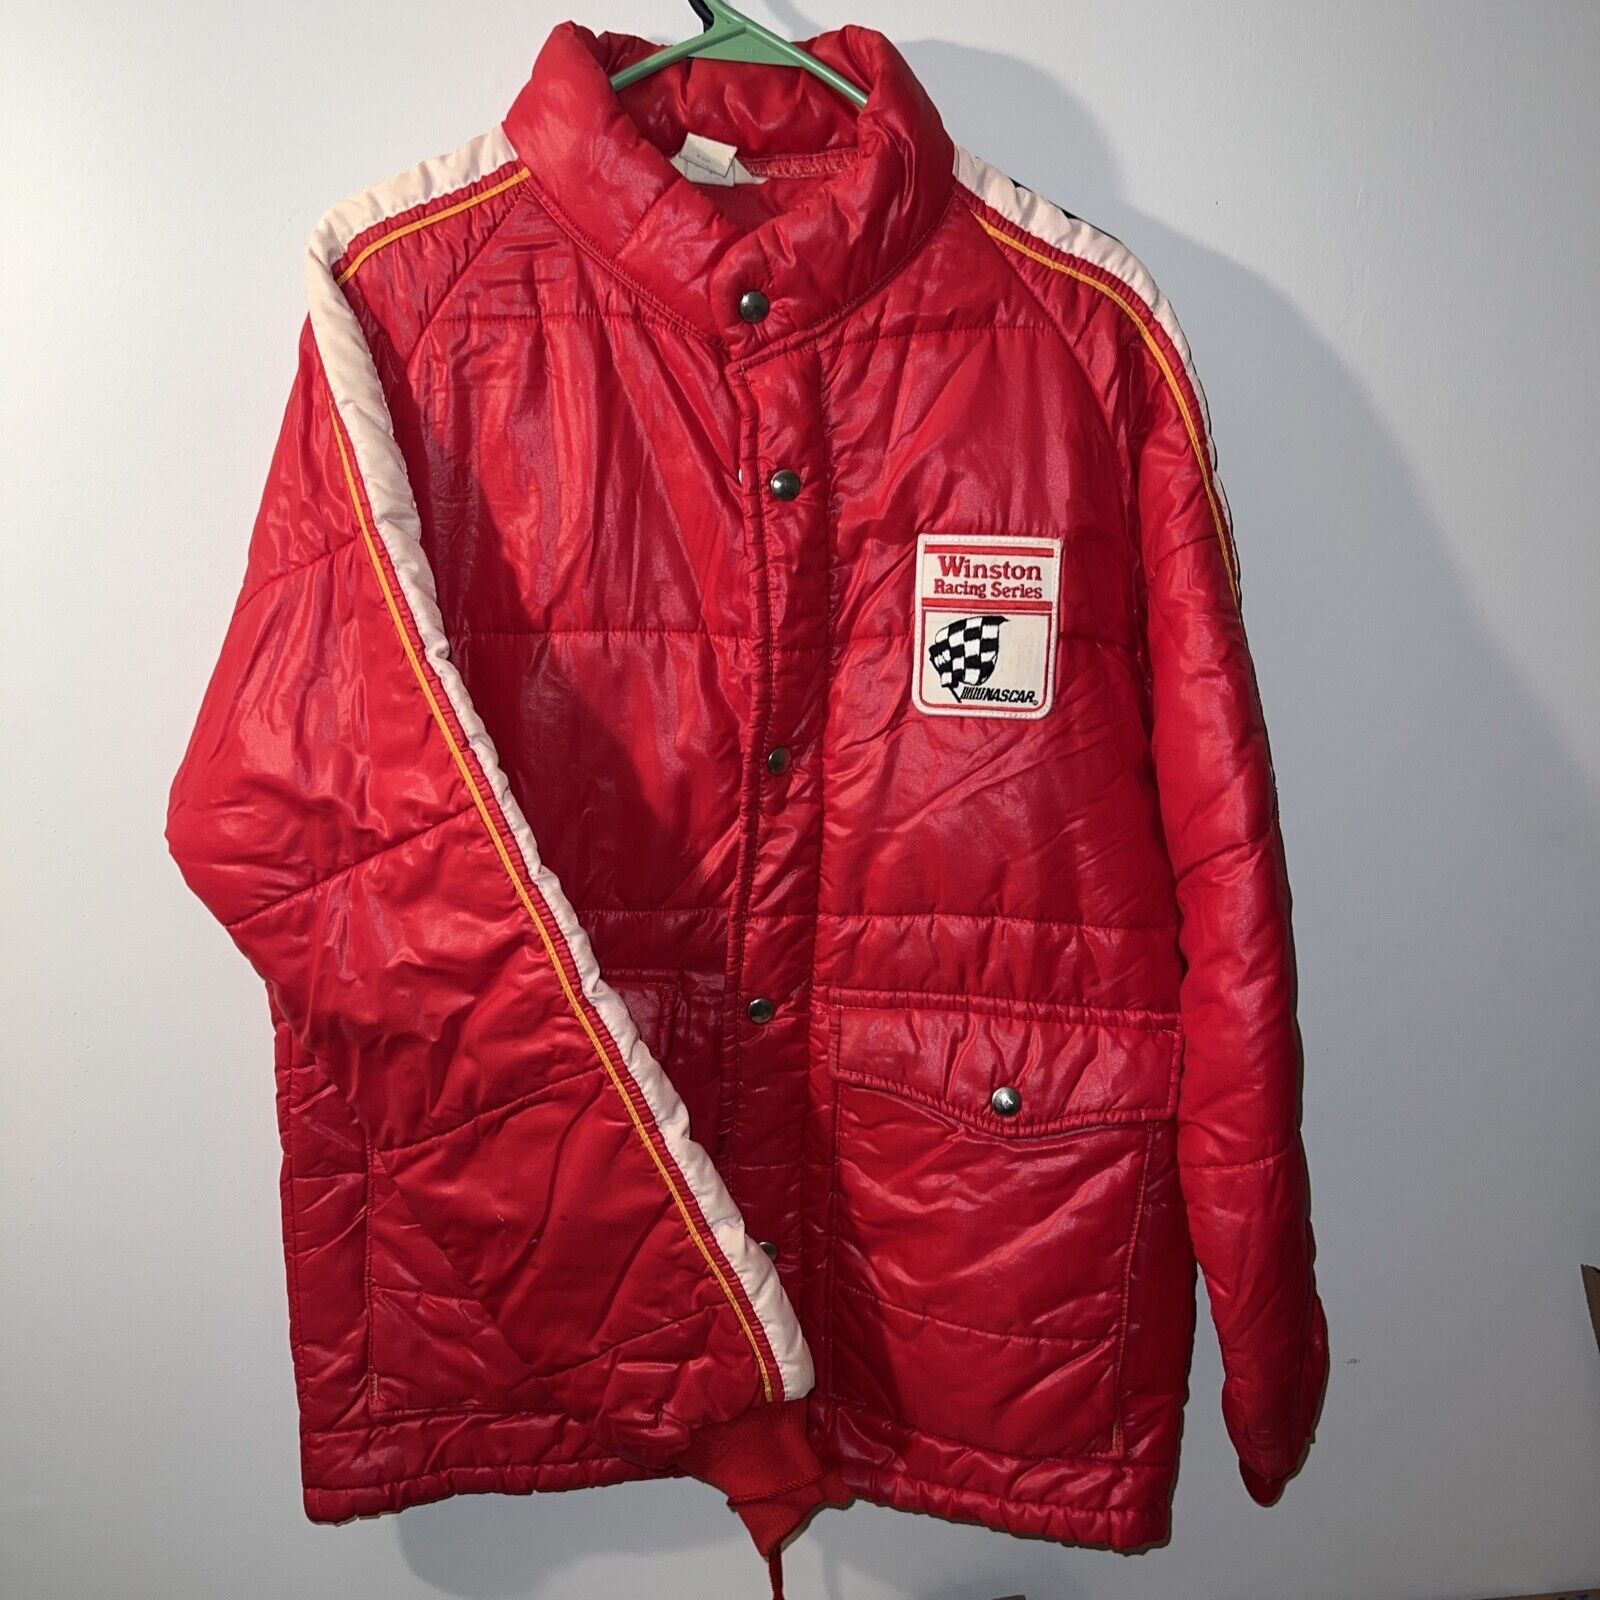 Vintage NASCAR Red Puffer Jacket 70s 80s Winston Racing Series Shiny Winter Coat